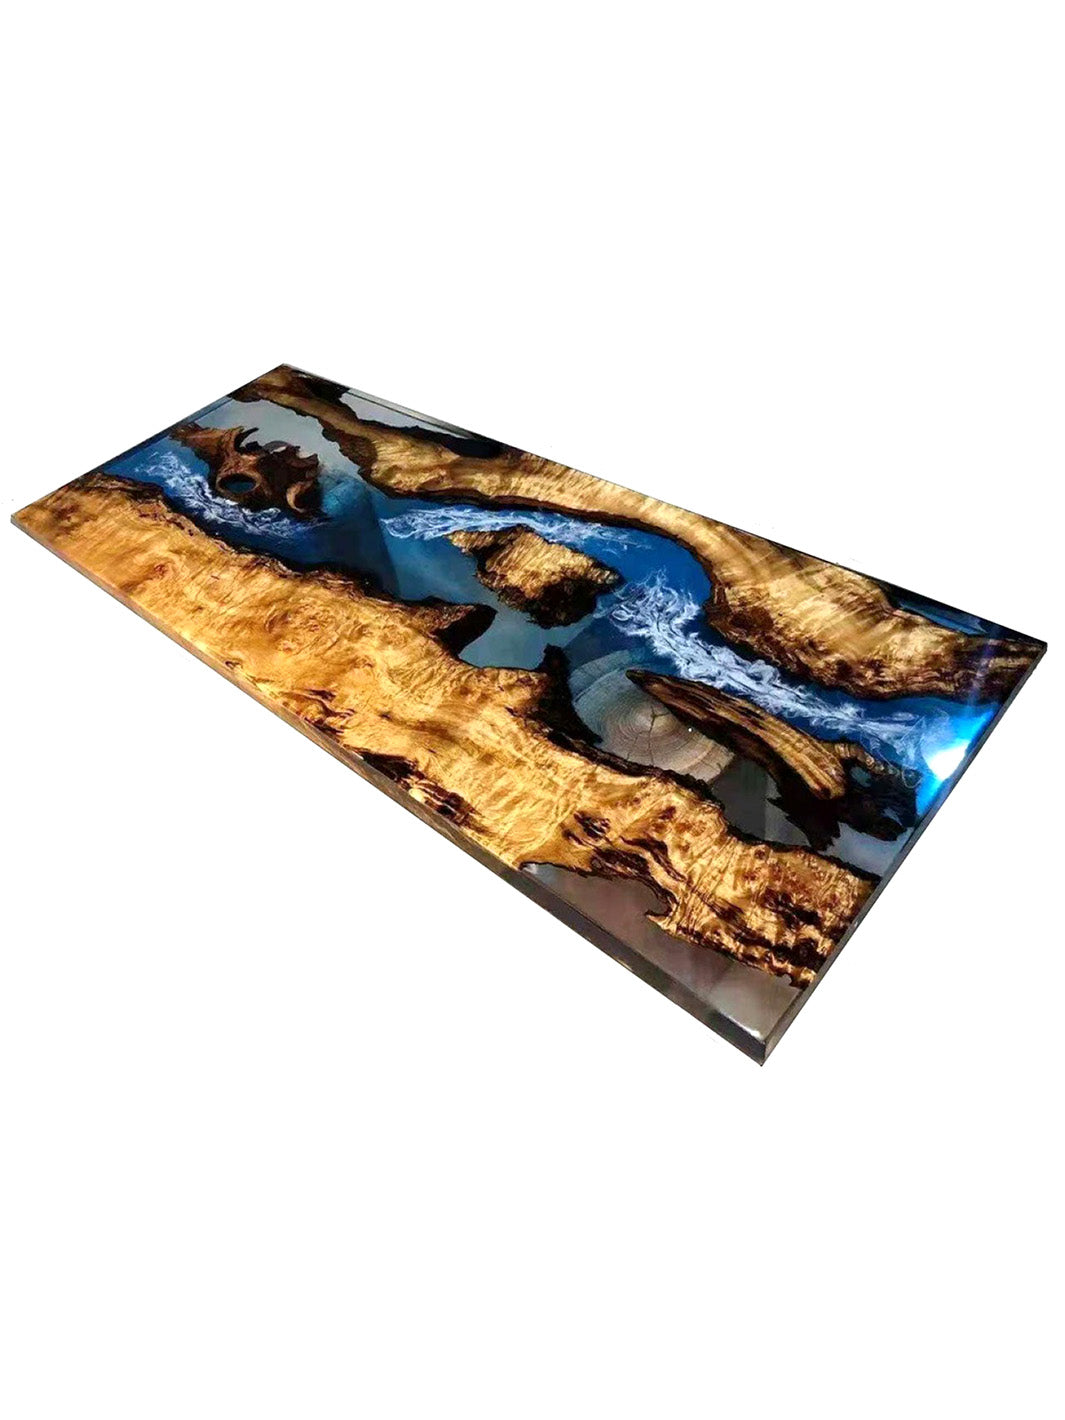 Handcrafted River Beach Epoxy Resin Wooden Coffee Table| 150x60cm Made 4 Decor Tables MDR0015-2